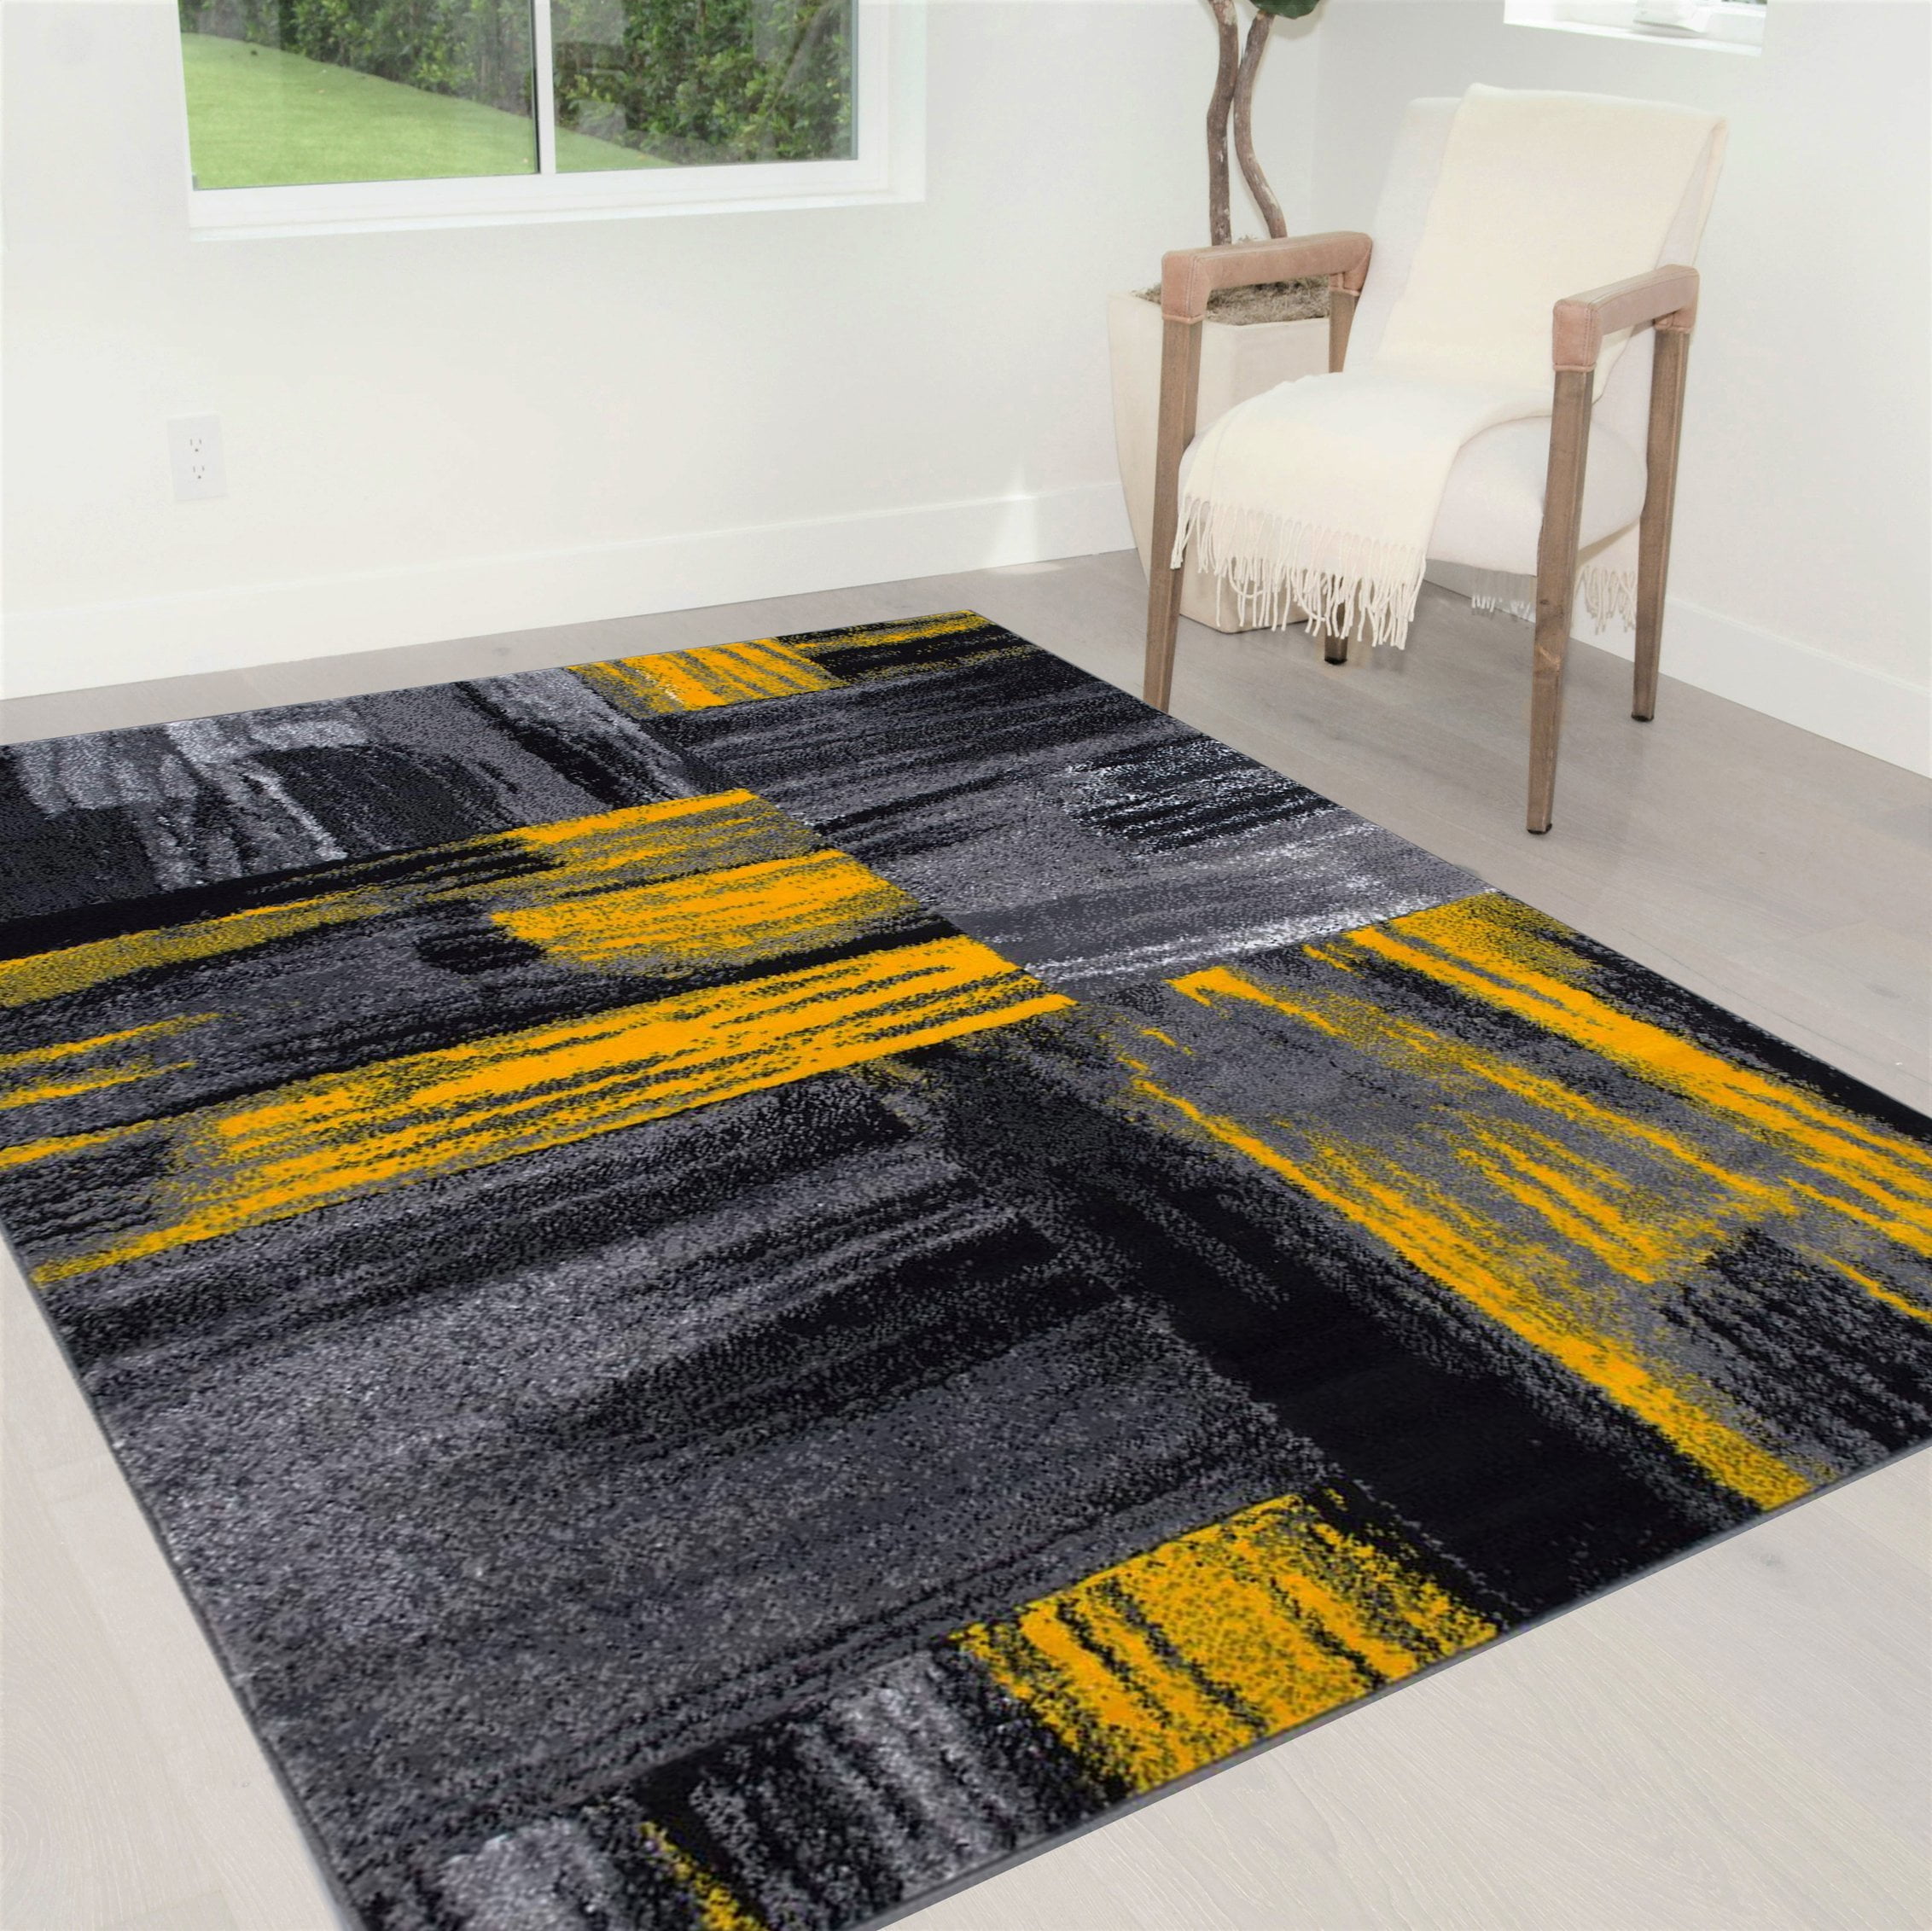 Mixed Brush Pattern Colors Area Rug, Area Rug Modern Design